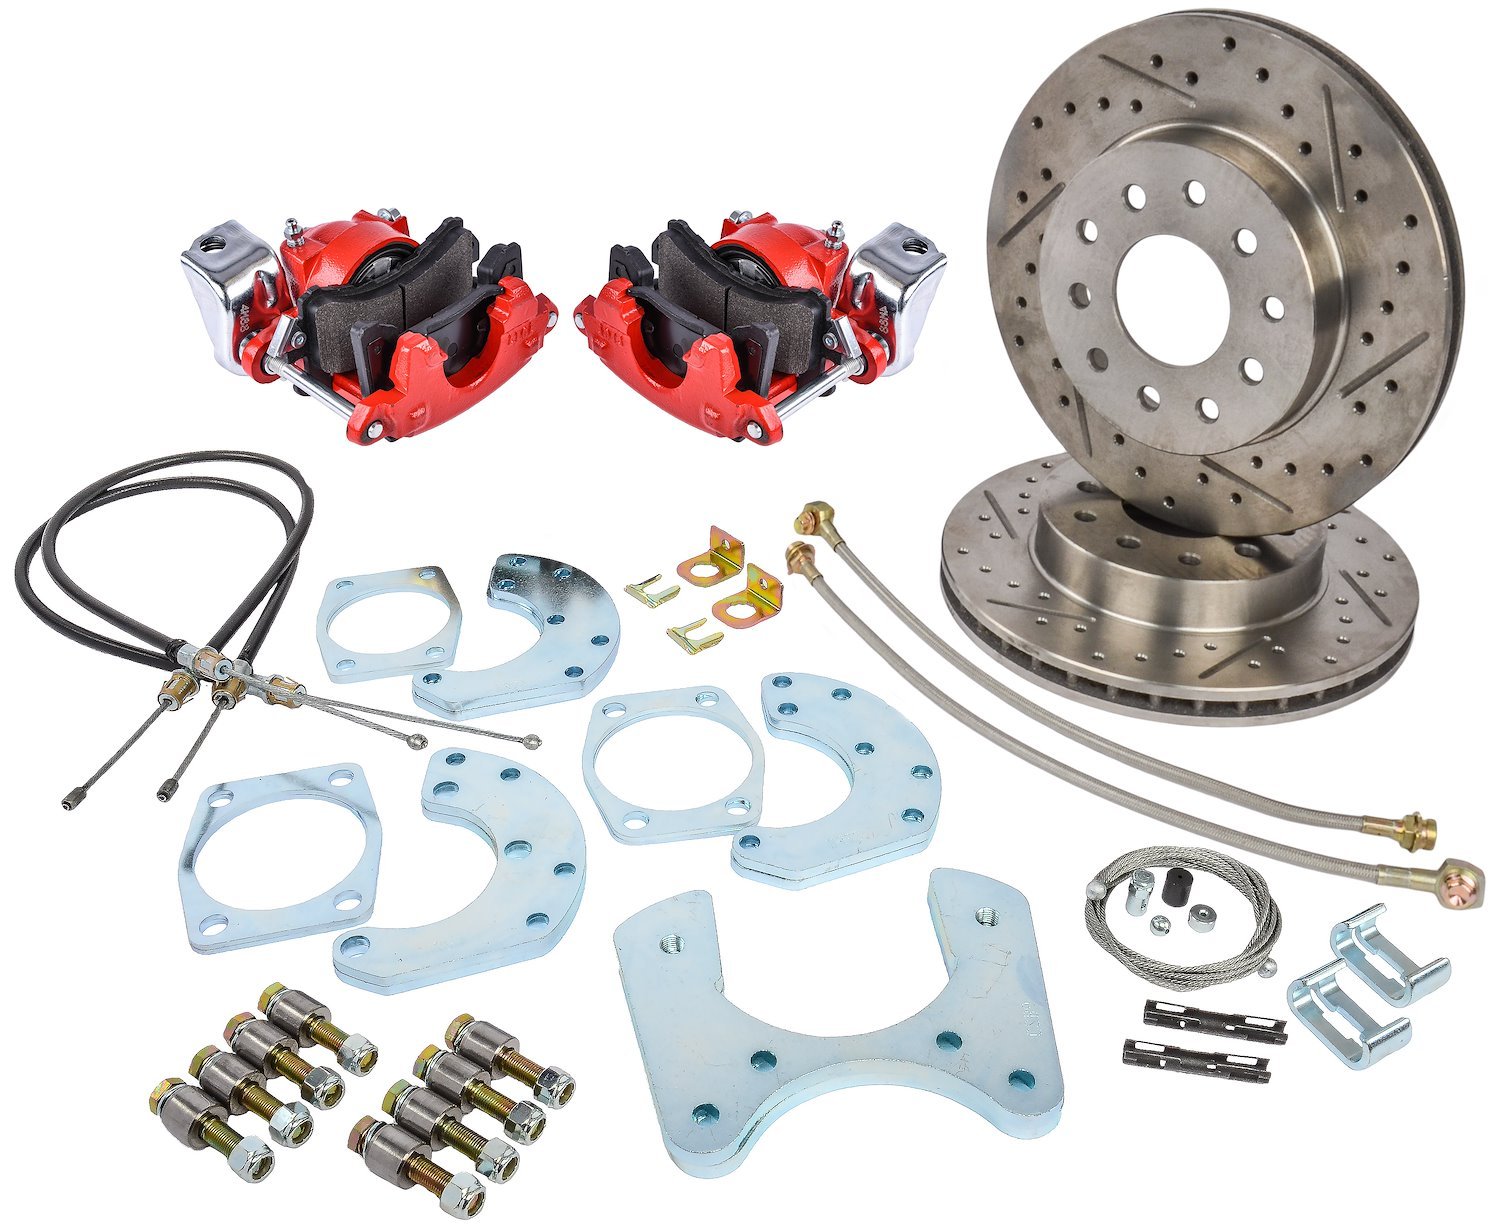 Ford 9 in. Rear Disc Brake Conversion Kit for Select 1968-1977 Ford Cars [Premium Kit w/E-Brake & Raw Calipers]